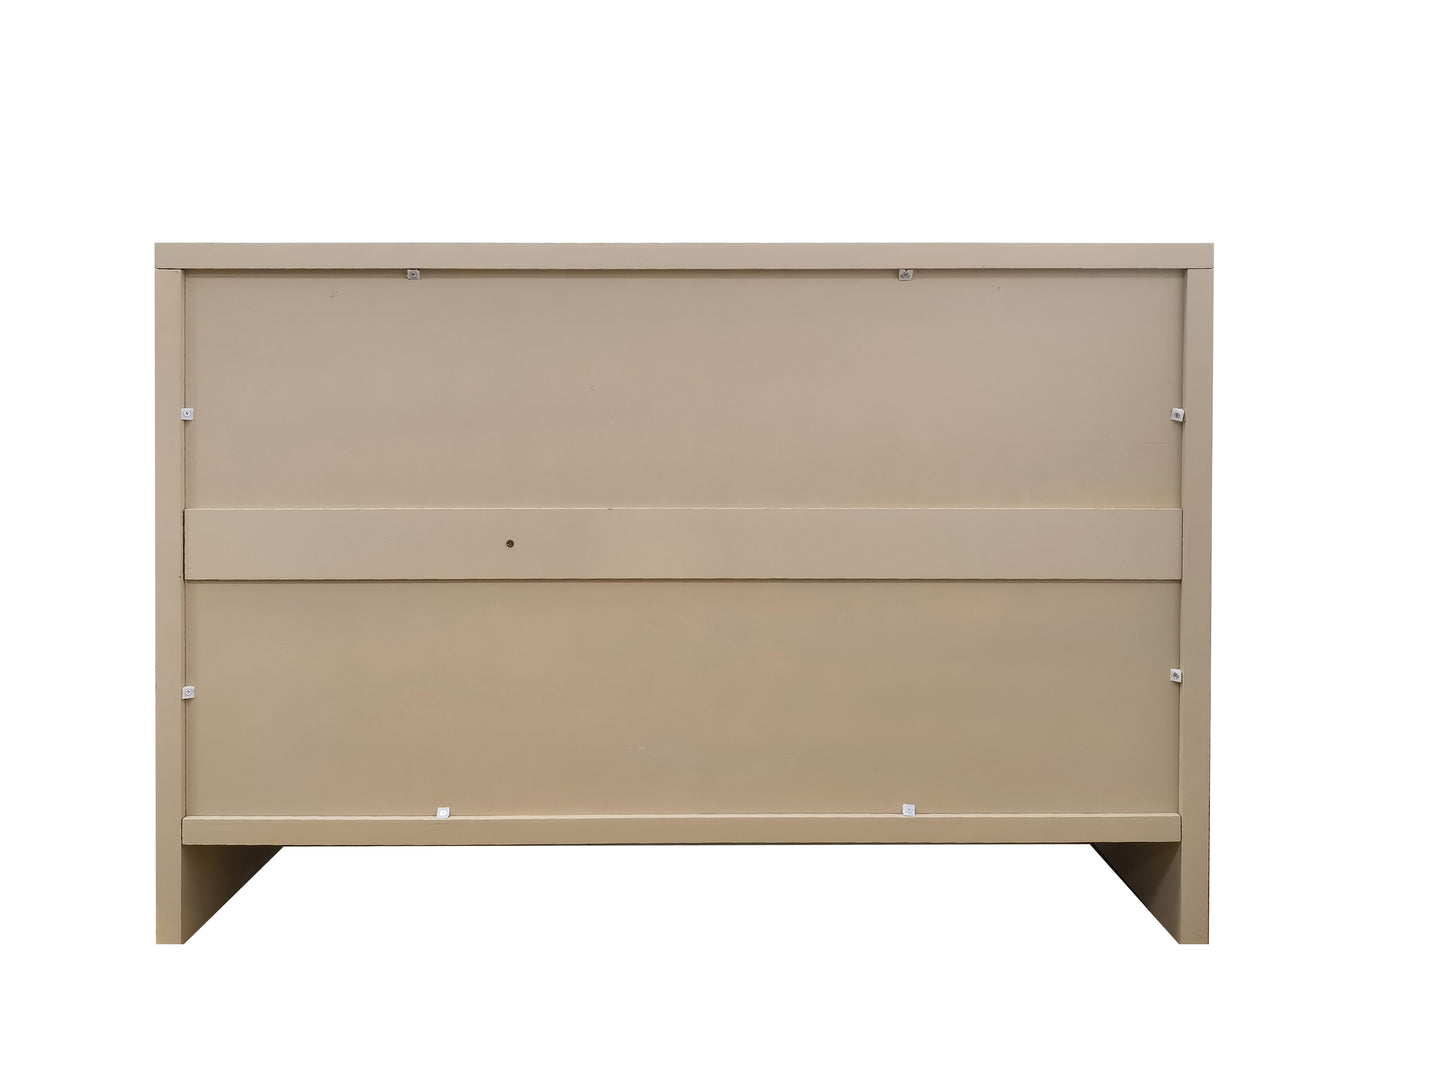 Countryside Elegance 3-Door Buffet Sideboard – Sophisticated Storage with Natural Wood Grain for Contemporary Homes